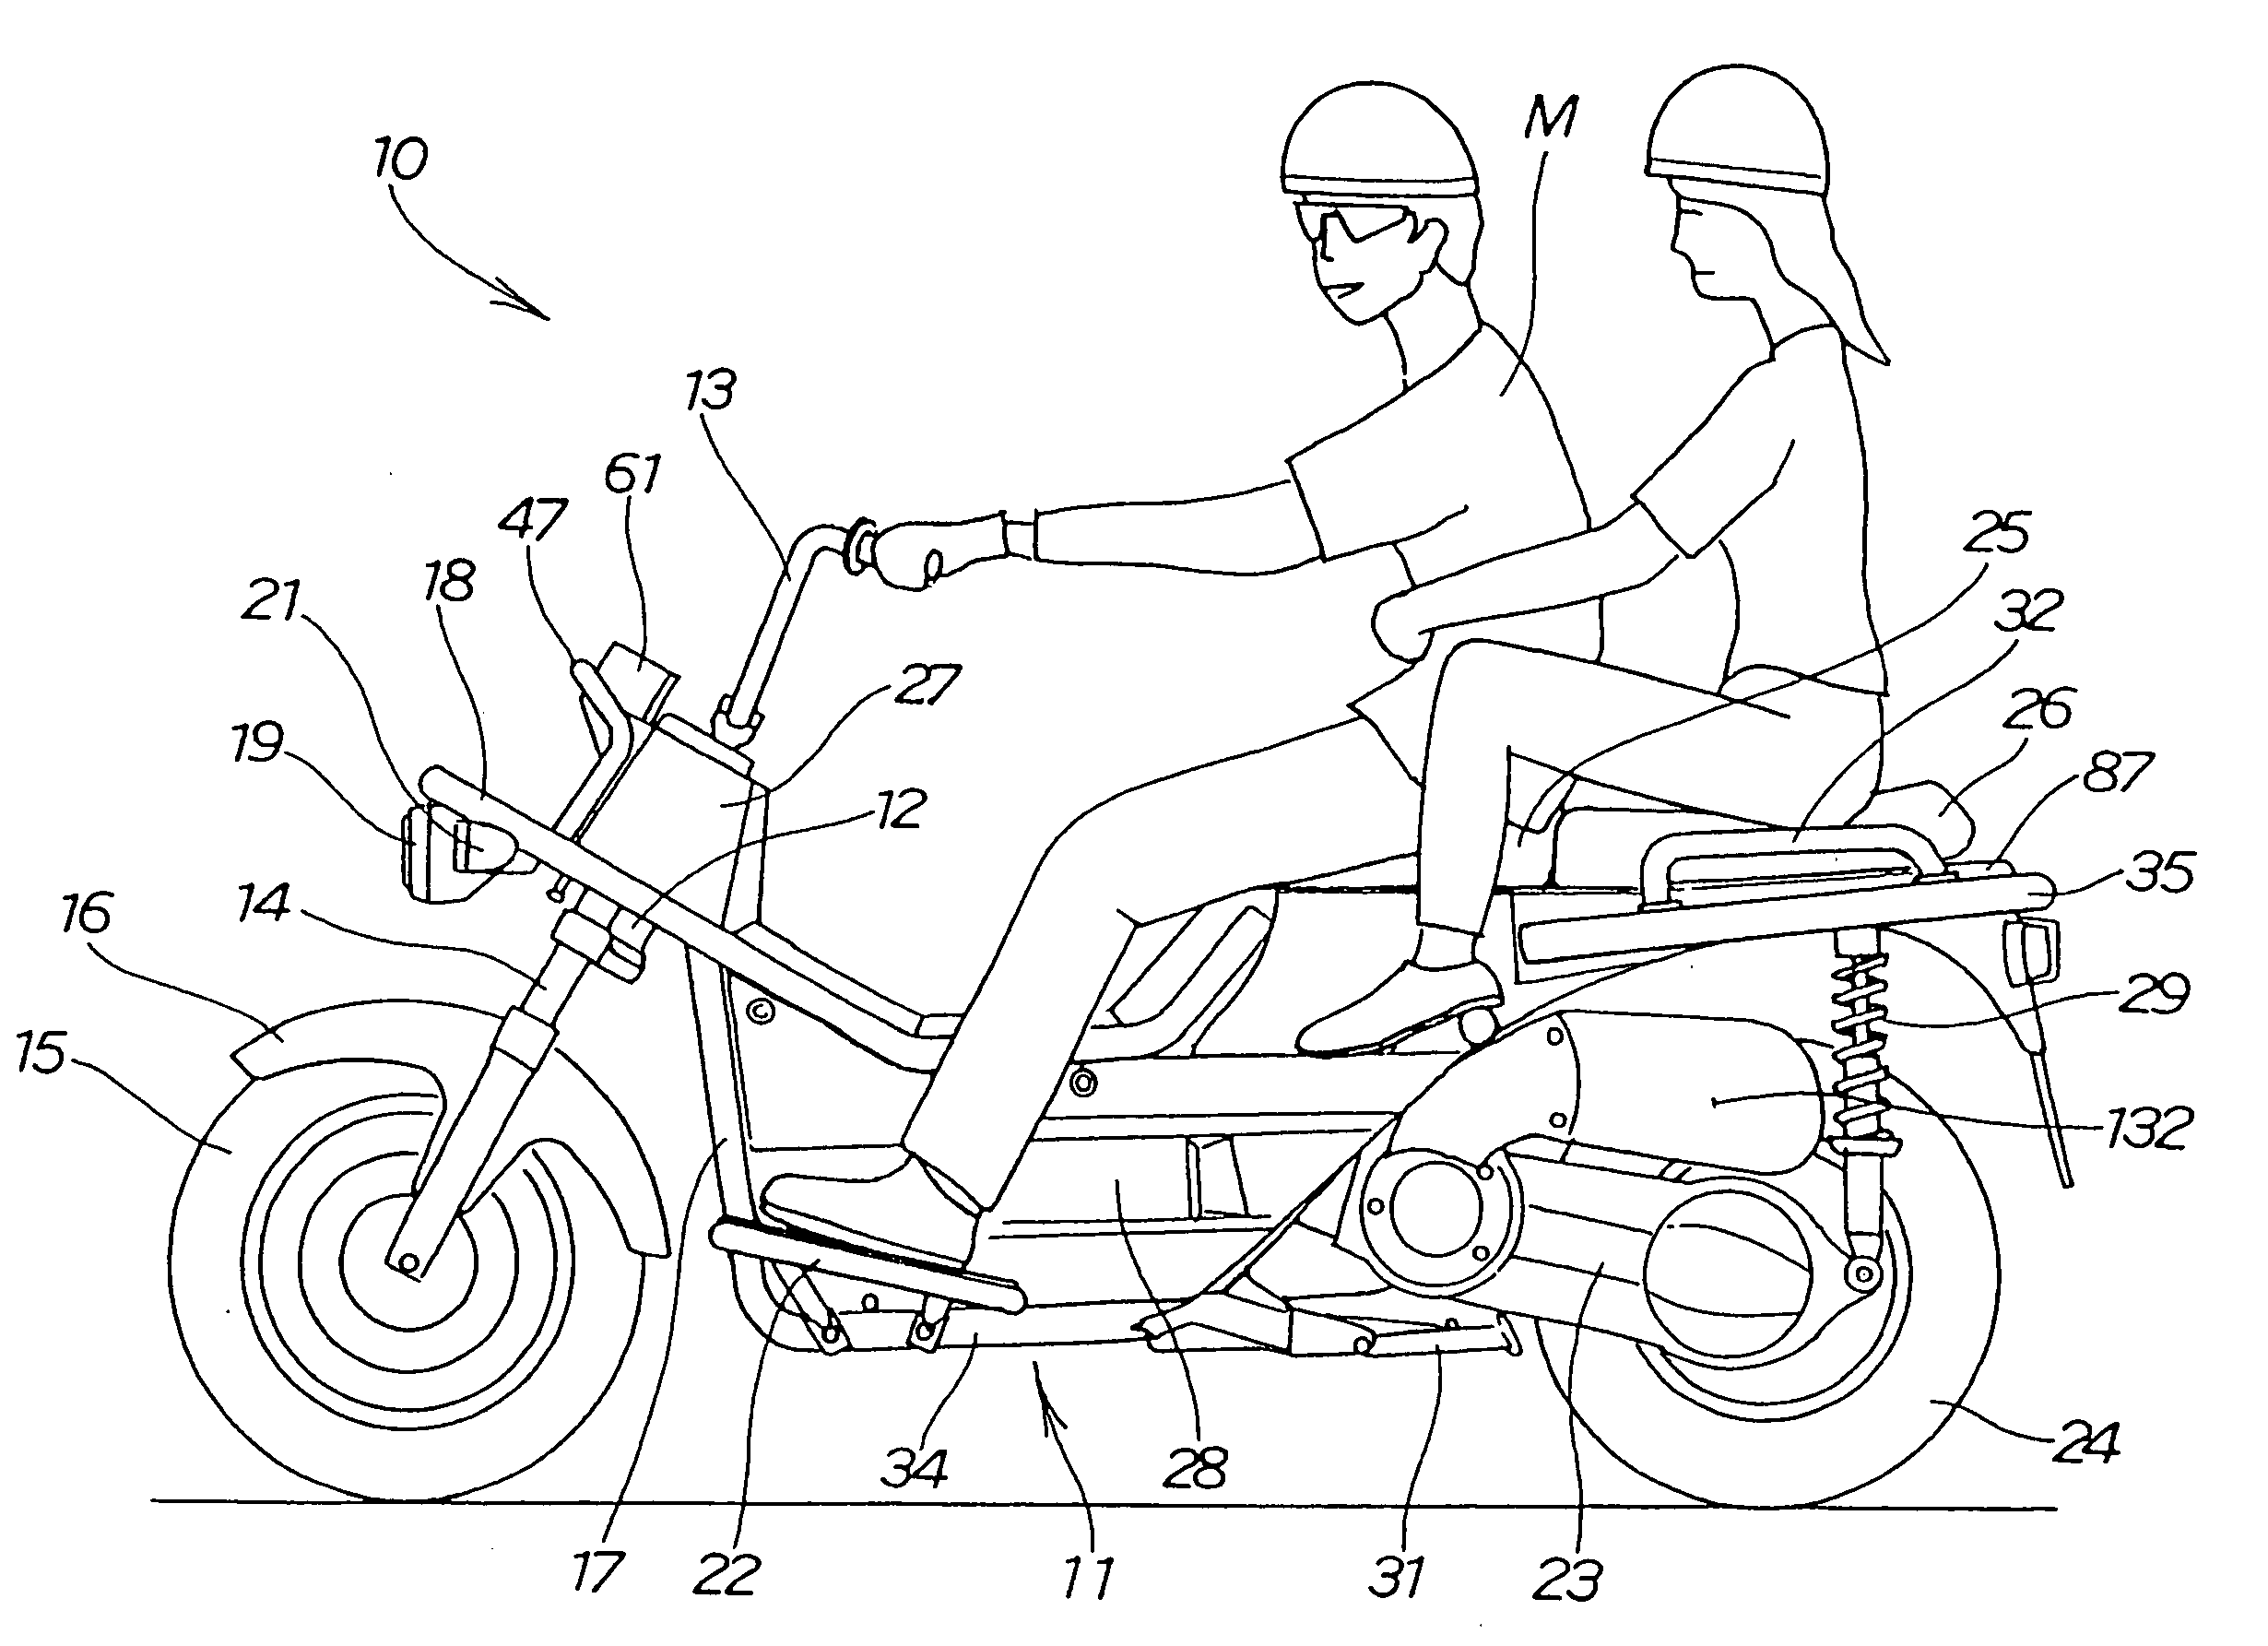 Front structure of motorcycle